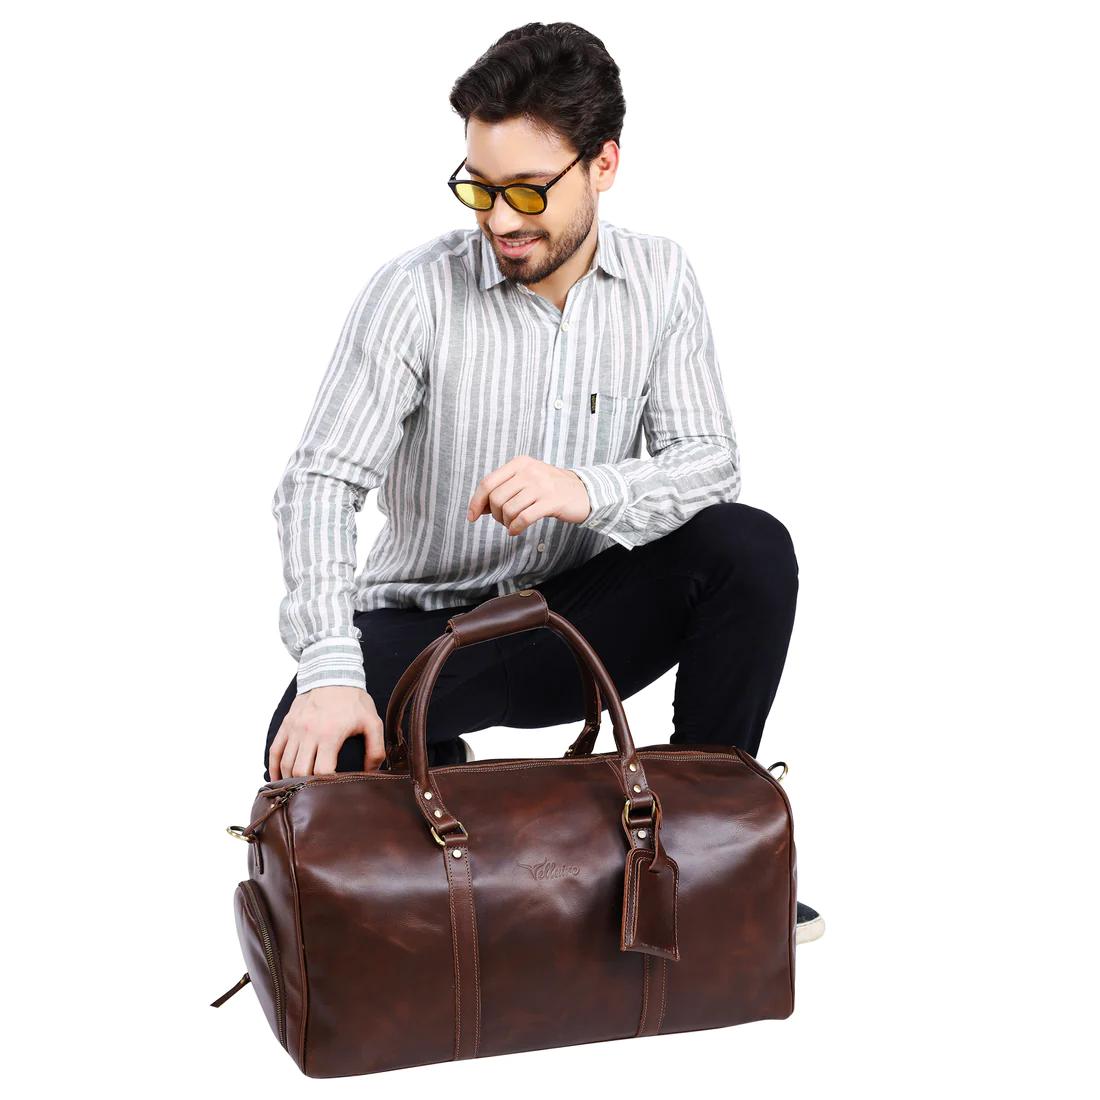 Buy Hammonds Flycatcher Duffle Bag for Travel - Genuine Leather Travel Bag  for Luggage - Ideal Cabin Weekender Bag - Spacious, Stylish and Durable @  ₹3,100.00